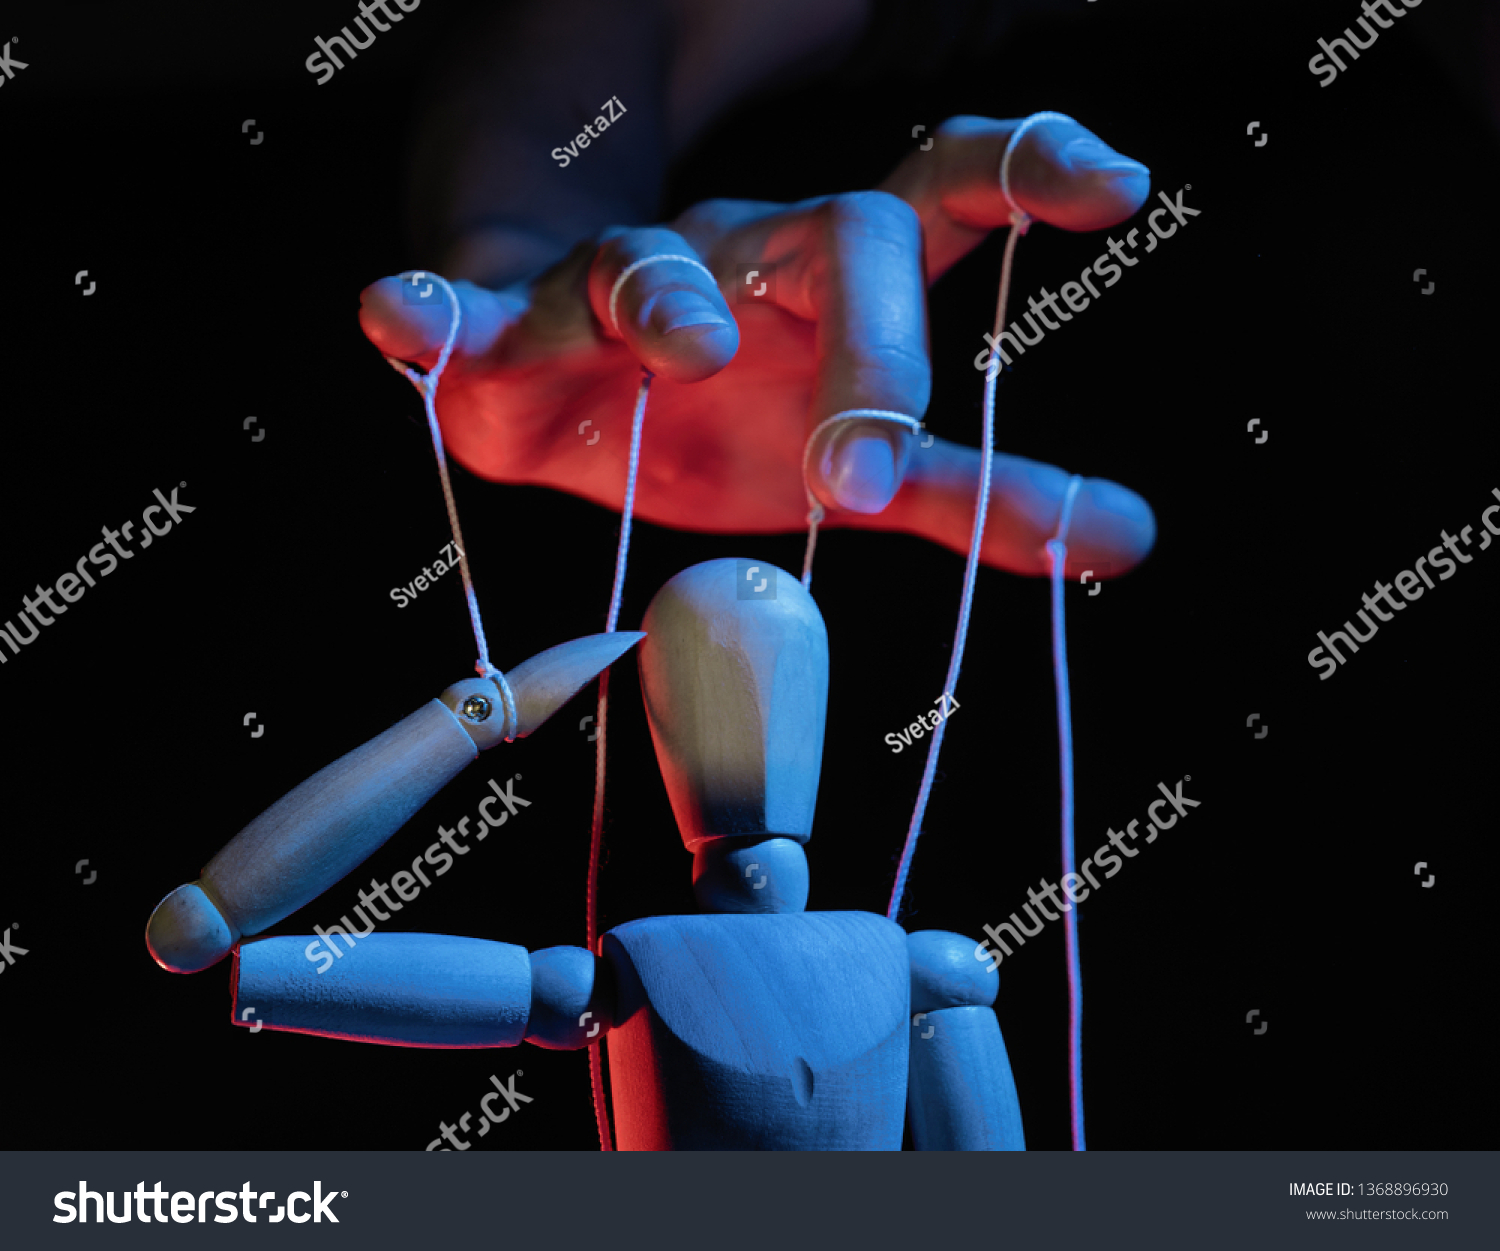 Concept of control. Marionette in human hand. Objects are colored on red and blue light. #1368896930